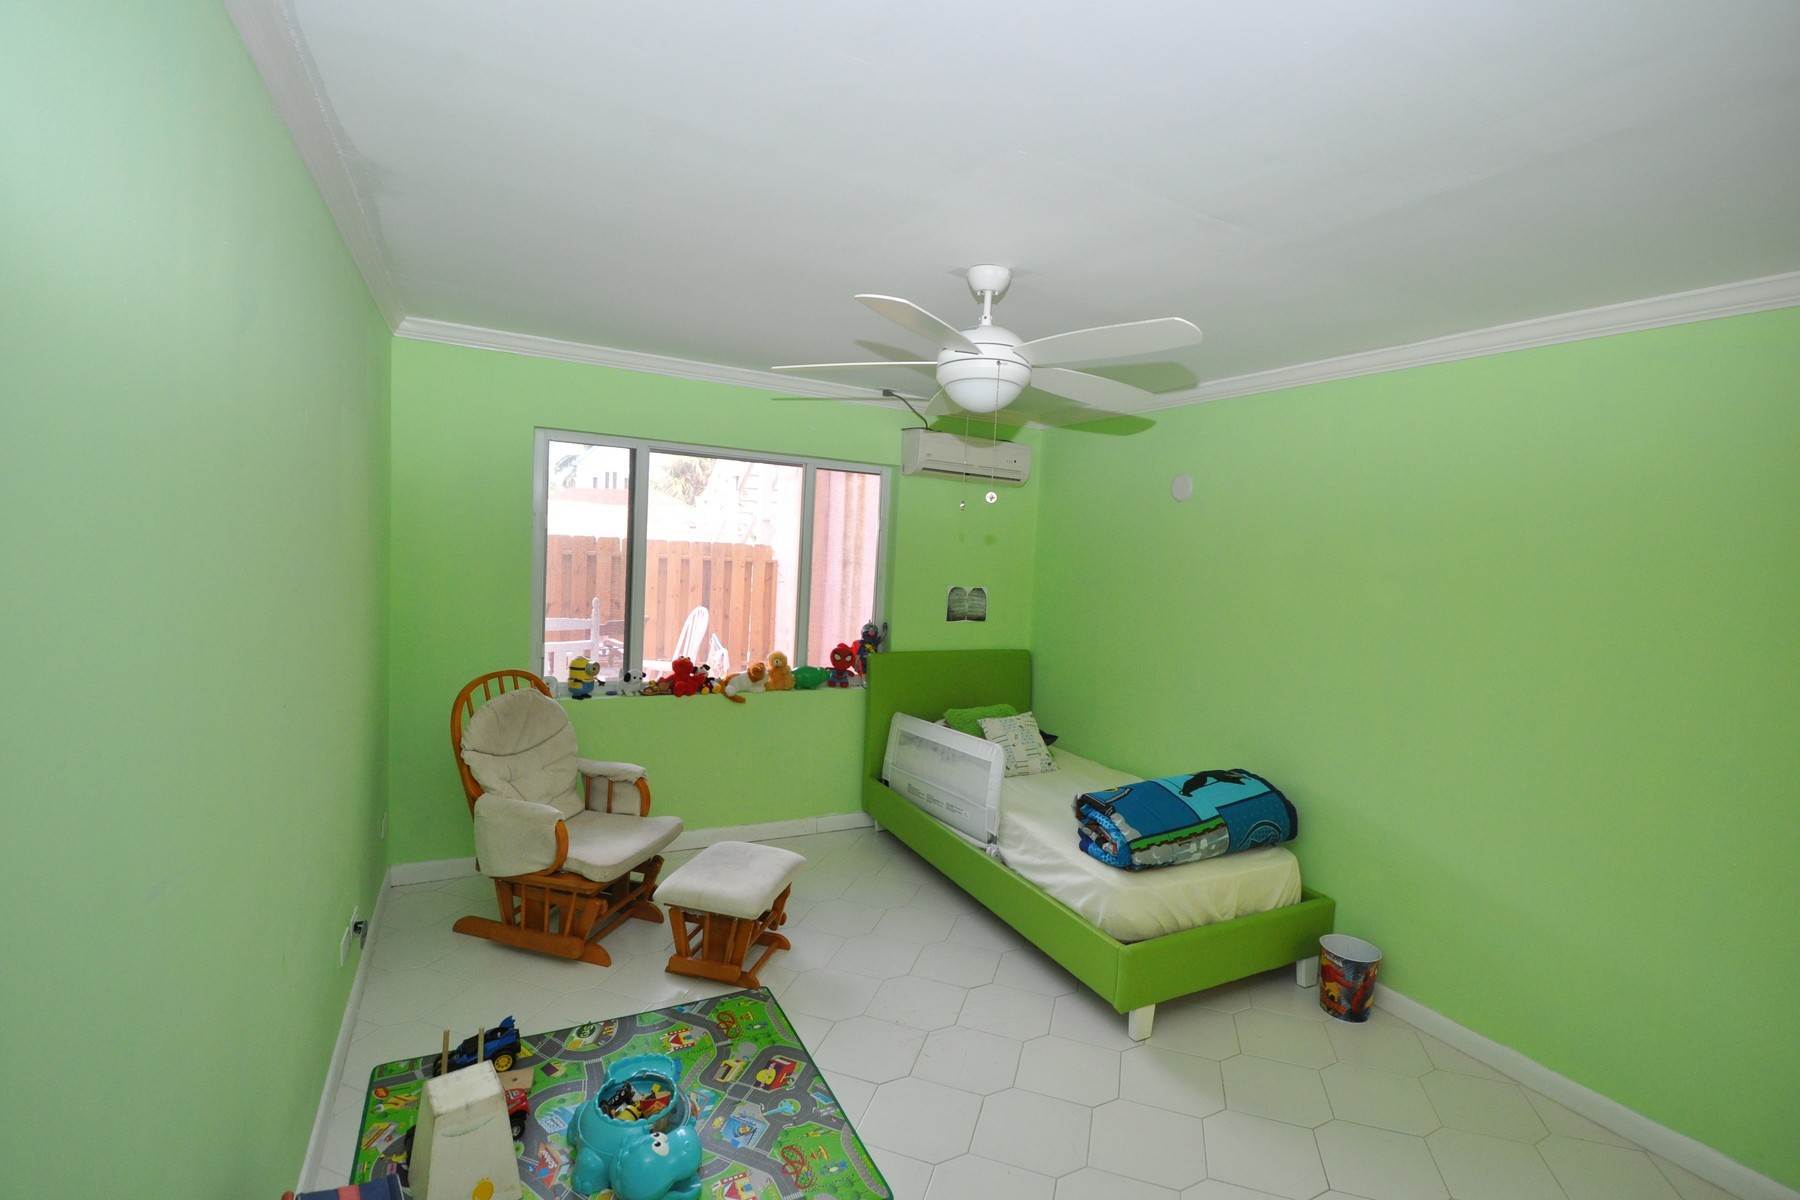 15. Condominiums for Sale at Rawson Court G04 Other Bahamas, Other Areas In The Bahamas, Bahamas